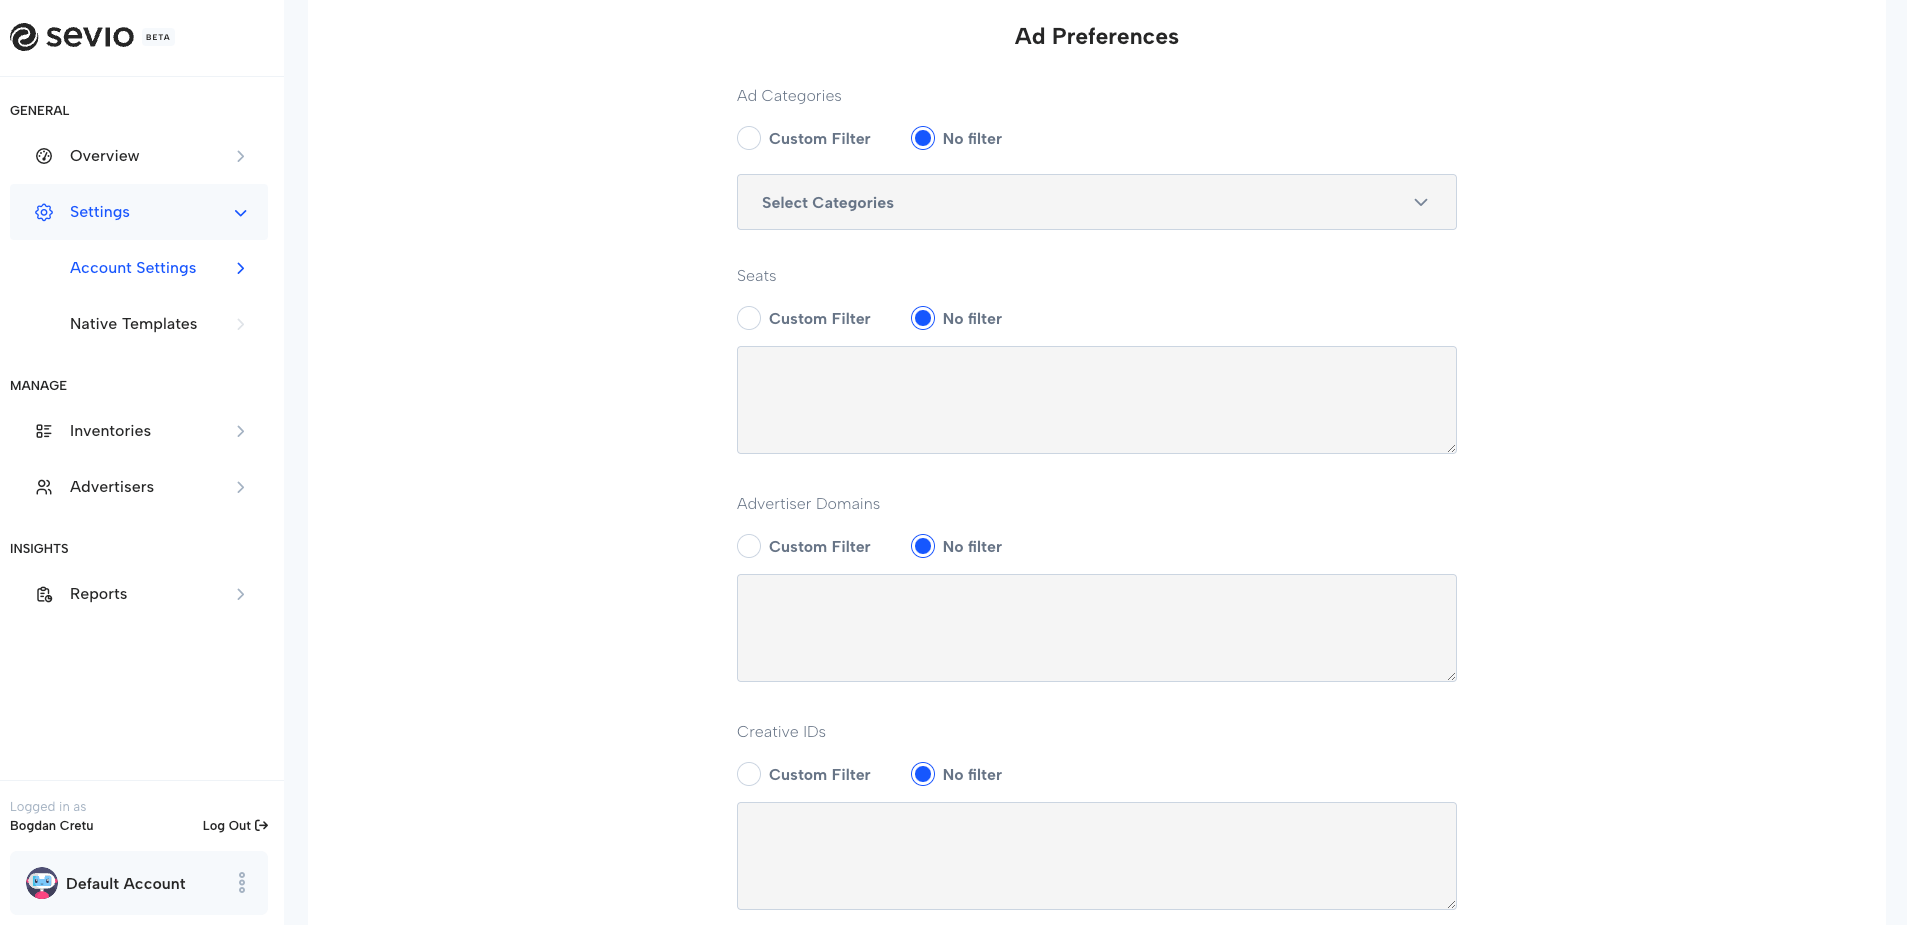 account-settings-ad-preferences.png